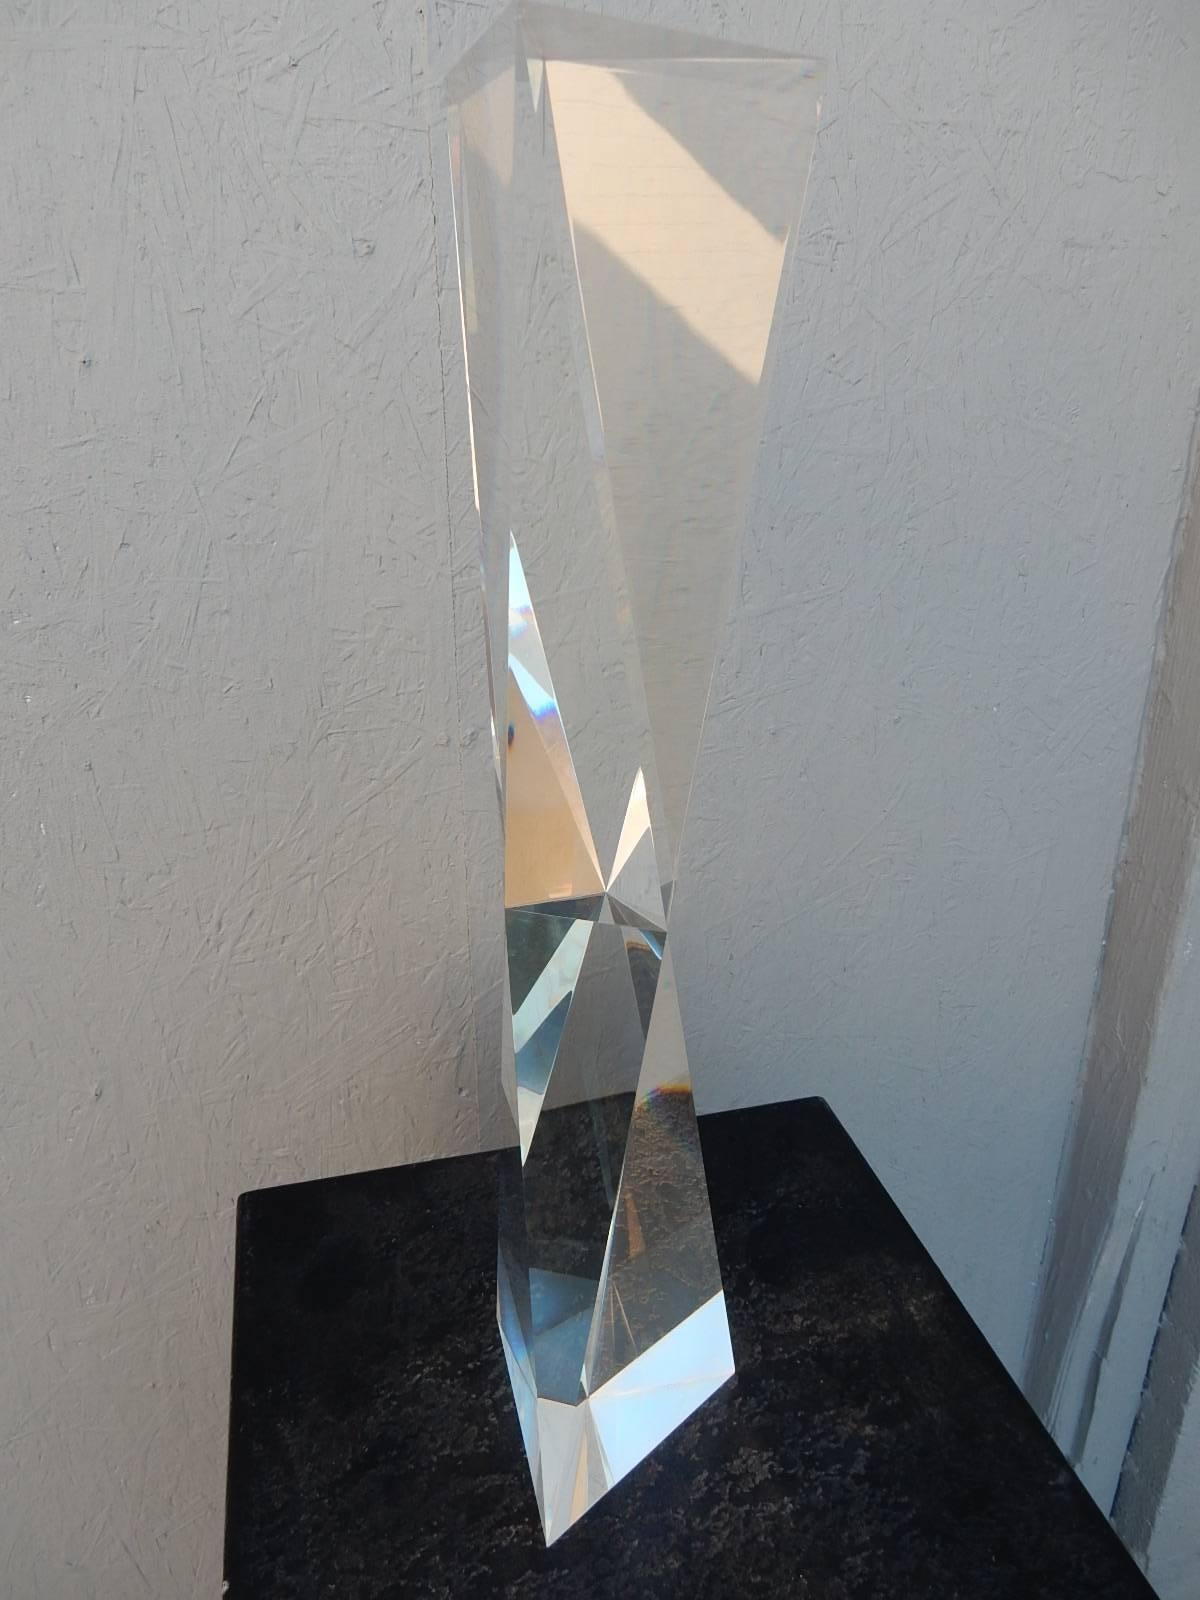 Late 20th Century 1970s Alessio Tasca Lucite Prism Tower Sculpture, Signed